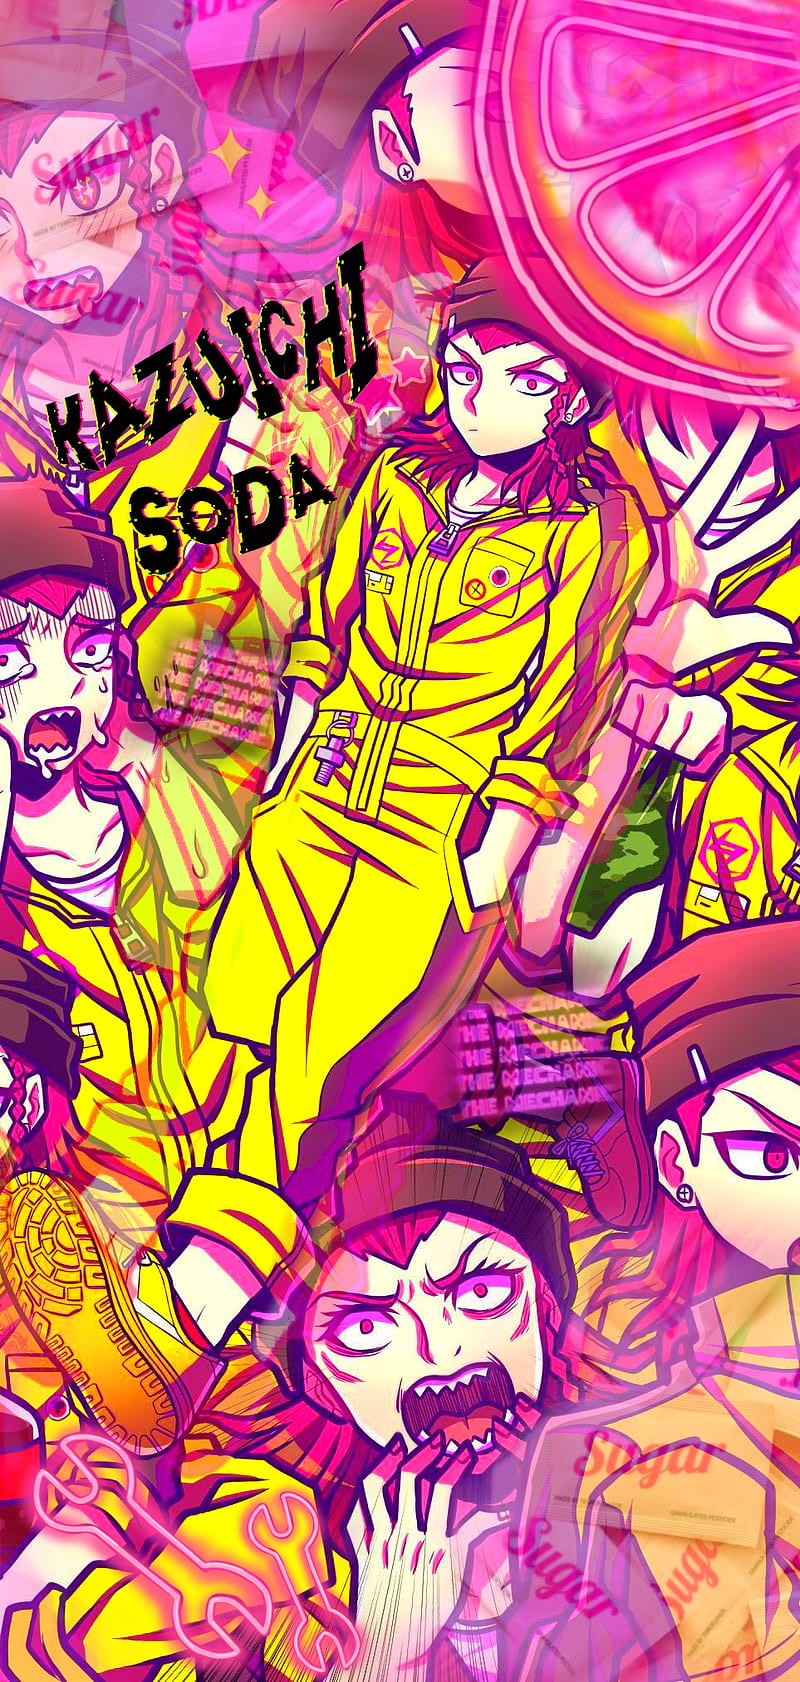 An Ibuki Mioda And Kazuichi Souda Fanchild As Requested - Anime - Free  Transparent PNG Download - PNGkey